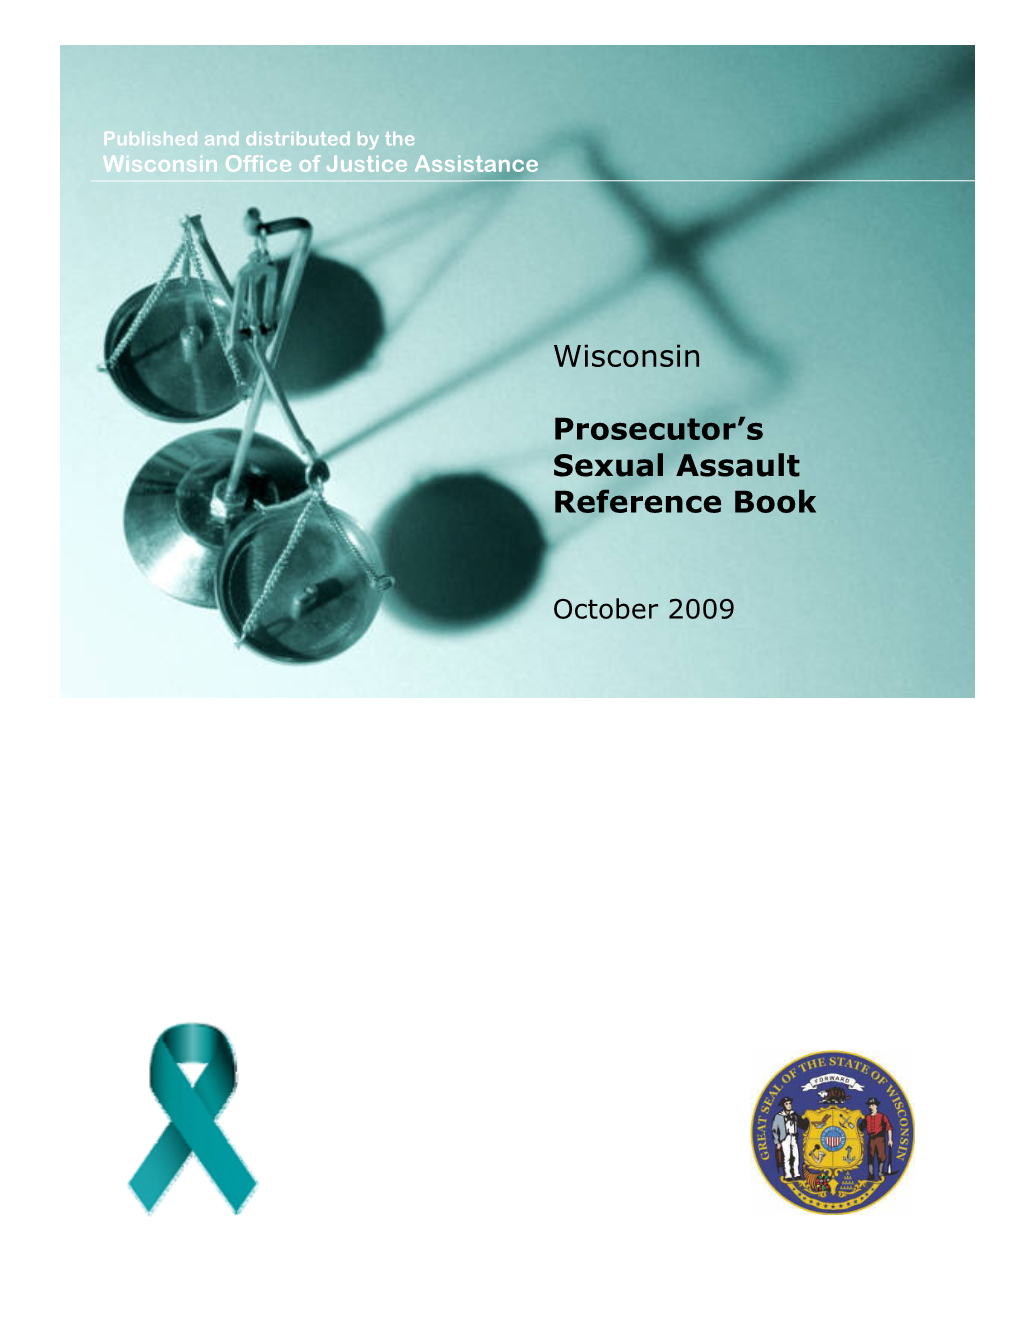 Wisconsin Prosecutor's Sexual Assault Reference Book